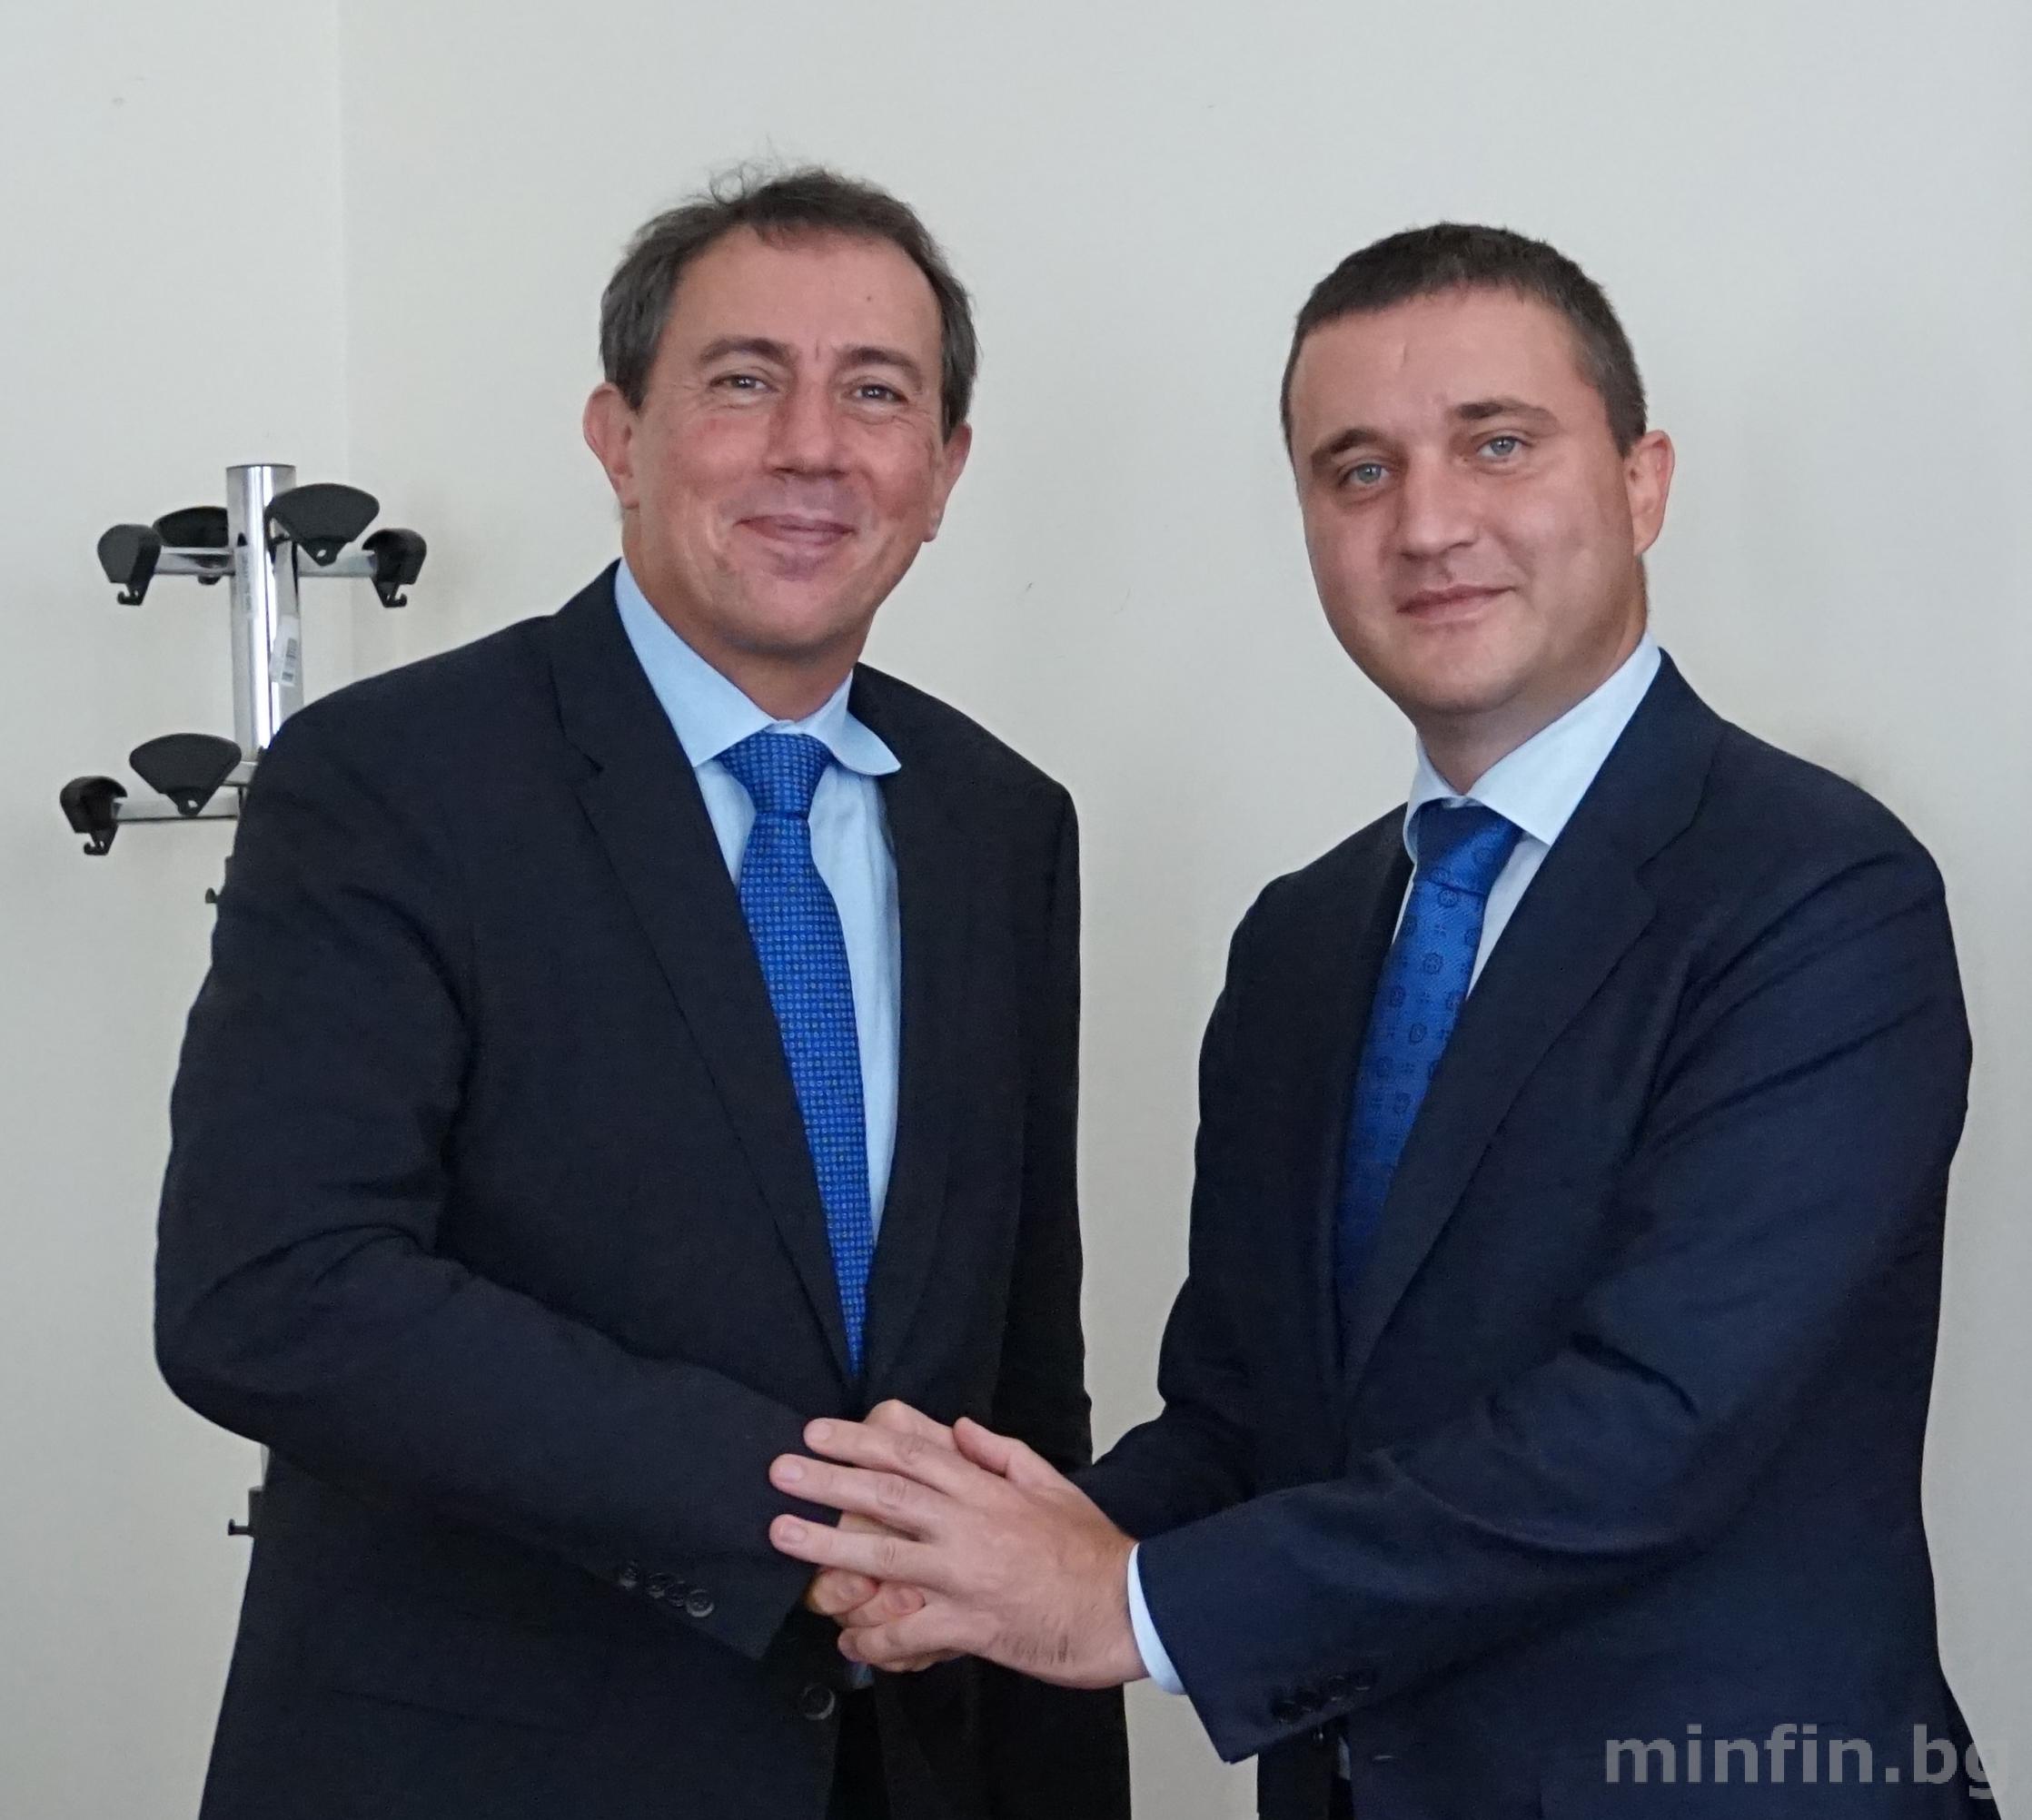 MINISTER OF FINANCE VLADISLAV GORANOV MET WITH WORLD BANK VICE PRESIDENT FOR EUROPE AND CENTRAL ASIA CYRIL MULLER